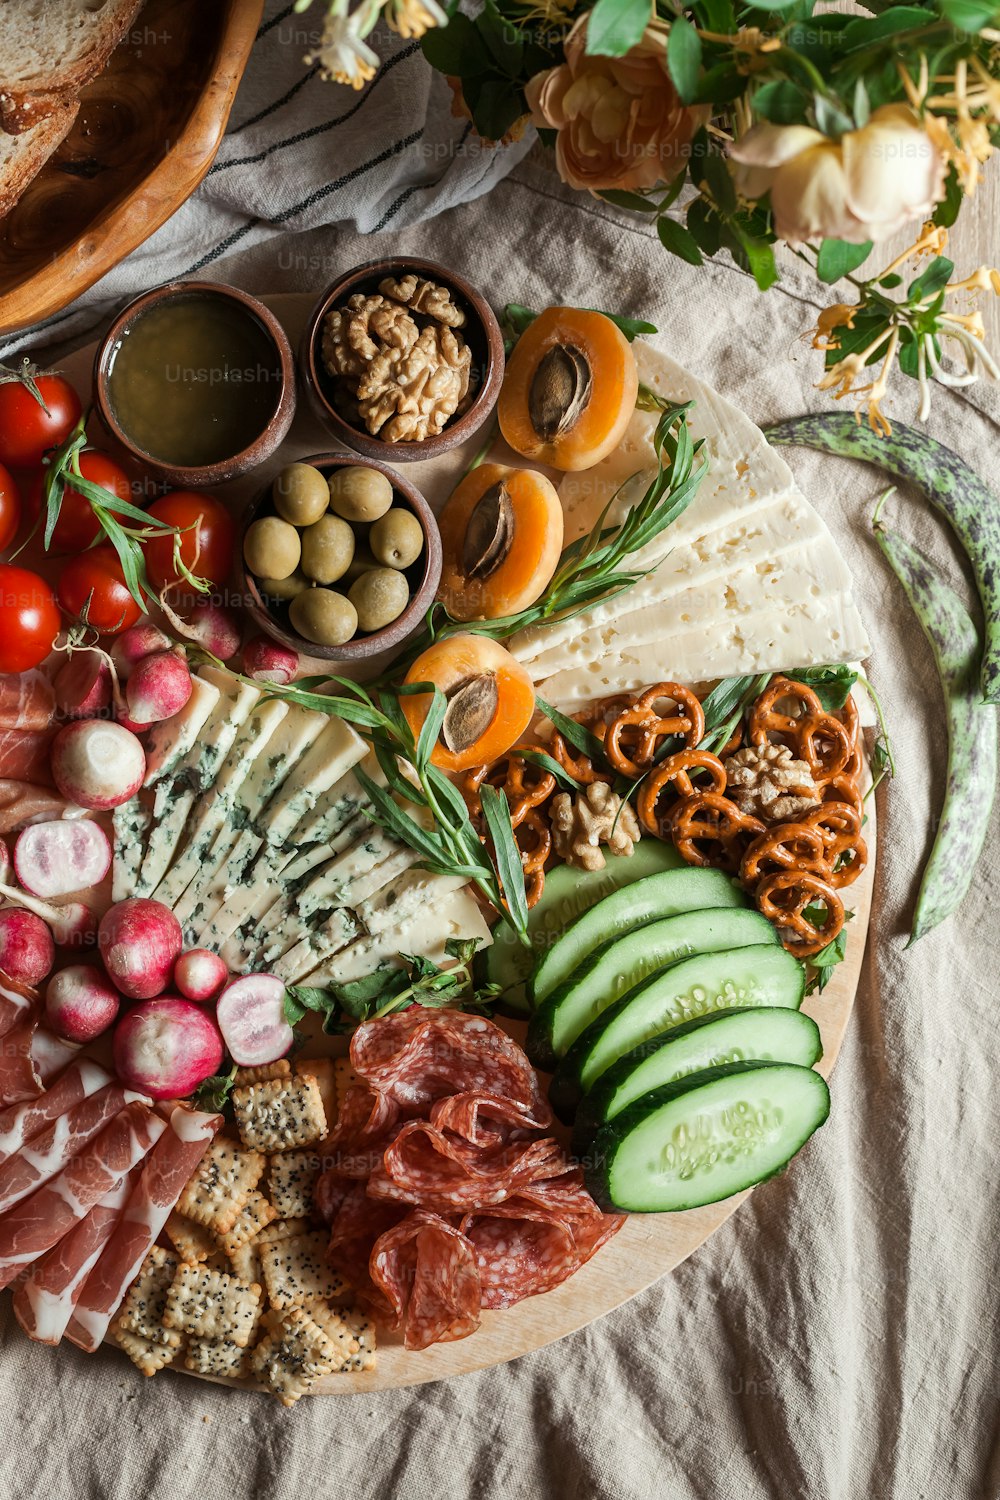 a platter of meats, cheeses, and vegetables